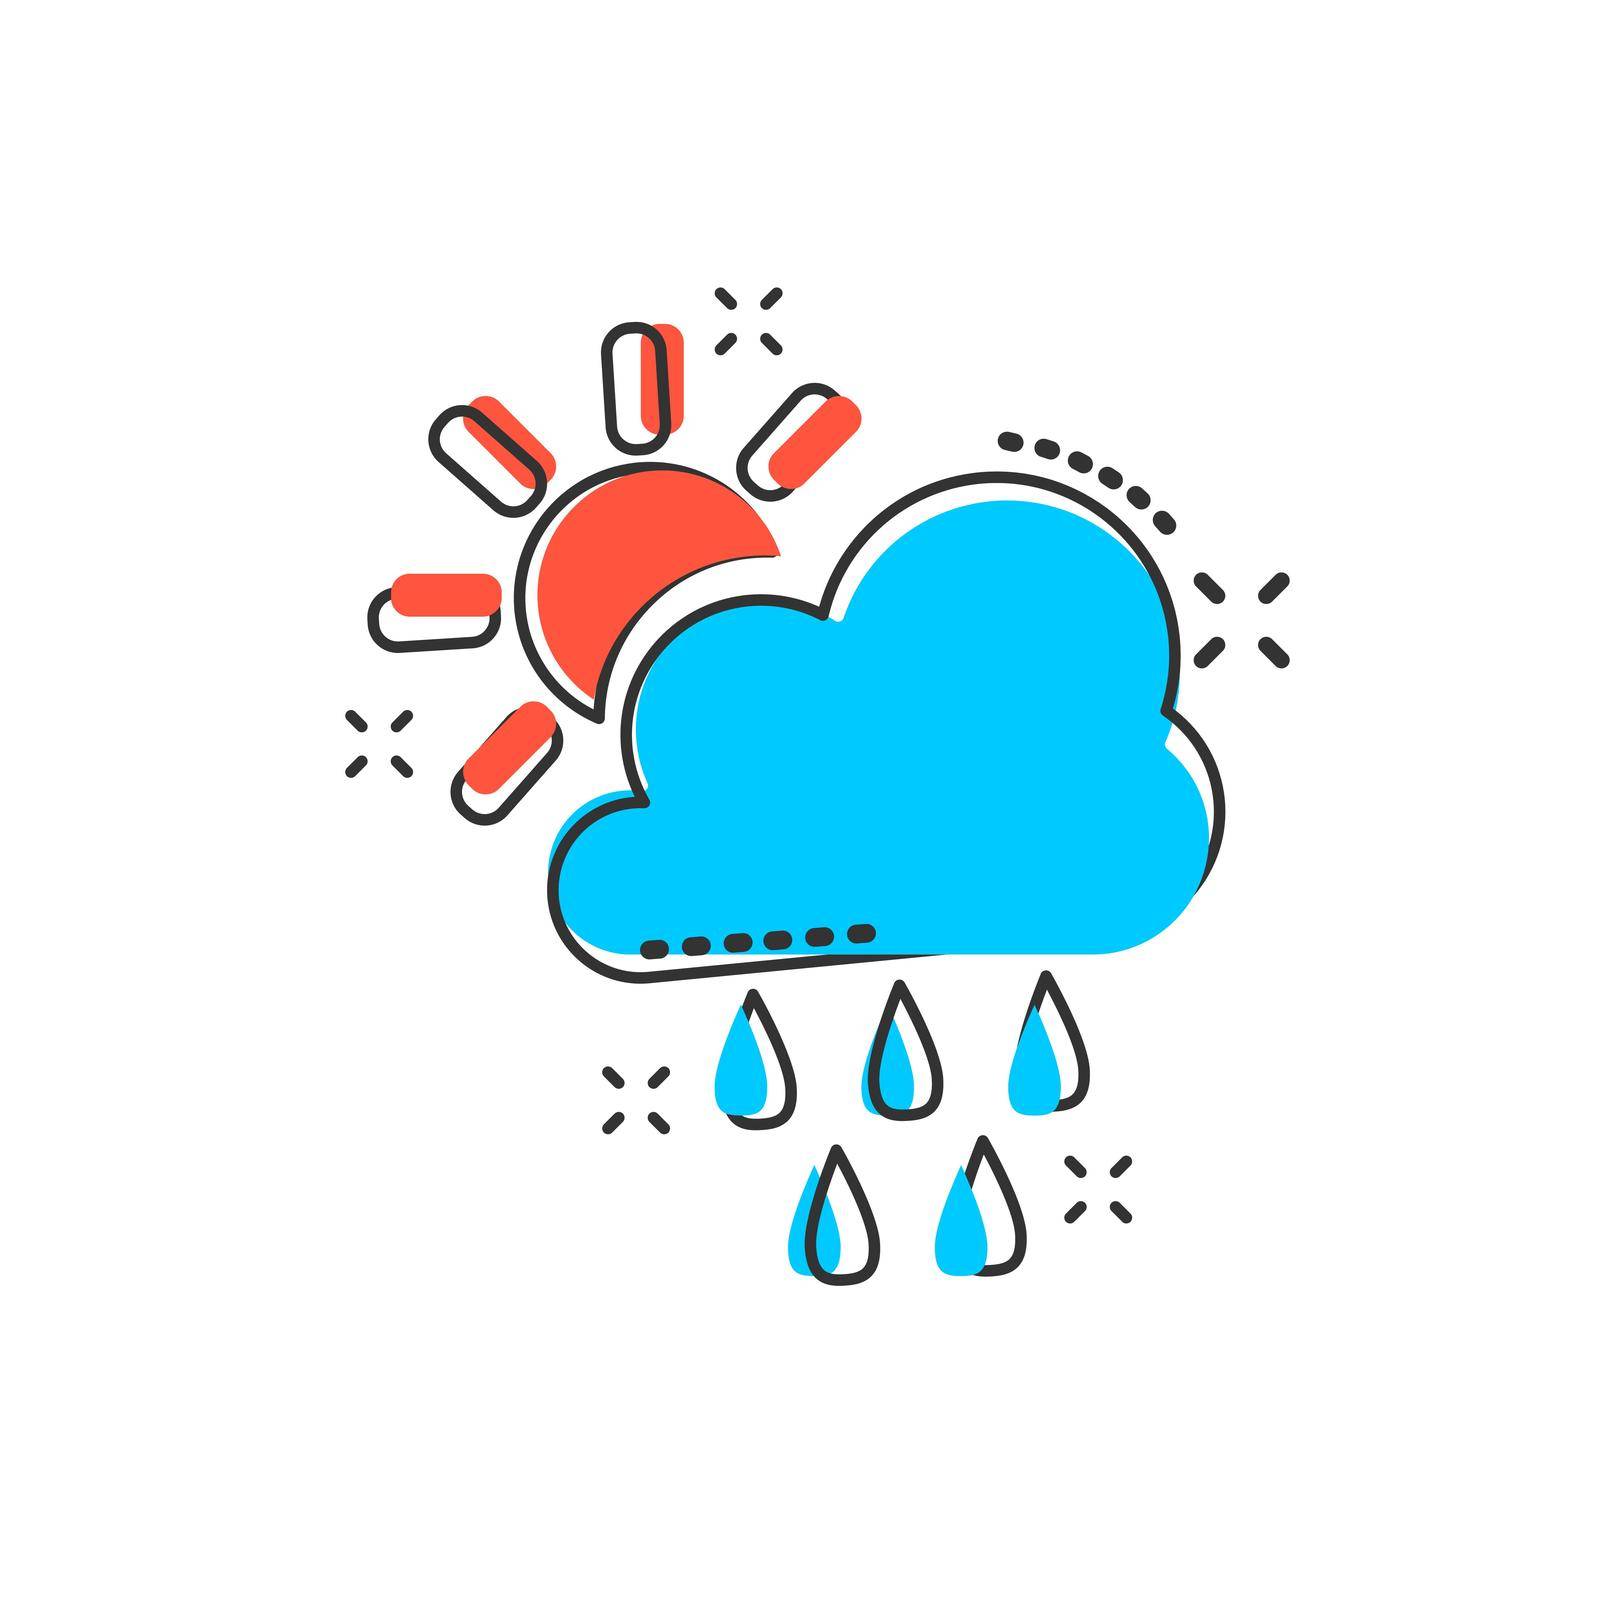 Vector cartoon weather forecast icon in comic style. Sun with clouds concept illustration pictogram. Cloud with rain business splash effect concept. by LysenkoA